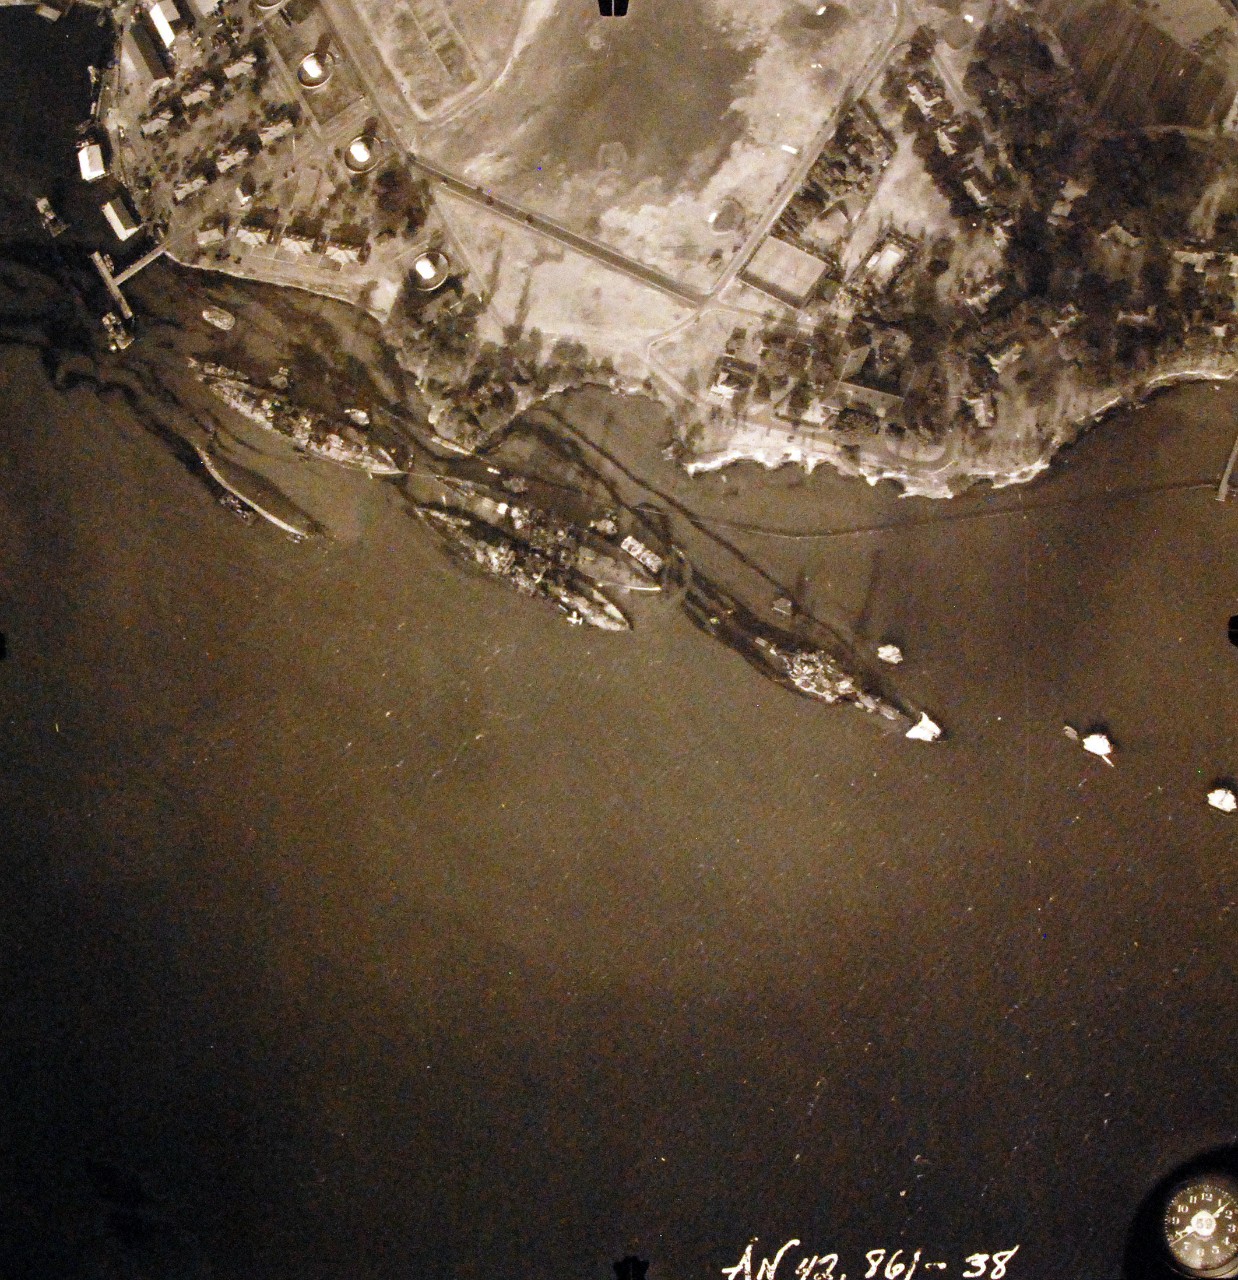 80-G-387597:  Pearl Harbor Attack, 7 December 1941.  Aerial view of "Battleship Row" moorings on the southern side of Ford Island, 10 December 1941, showing damage from the Japanese raid three days earlier.  Diagonally, from left center to lower right are: USS Maryland (BB-46), lightly damaged, with the capsized USS Oklahoma (BB-37) outboard. USS Tennessee (BB-43), lightly damaged, with the sunken USS West Virginia (BB-48) outboard. USS Arizona (BB-39), sunk, with her hull shattered by the explosion of the magazines below the two forward turrets. Note dark oil streaks on the harbor surface, originating from the sunken battleships. Photographed by VJ-1 at an altitude of 3,000 feet and released November 9, 1950.  U.S. Navy photograph, now in the collections of the National Archives.      (9/22/2015).